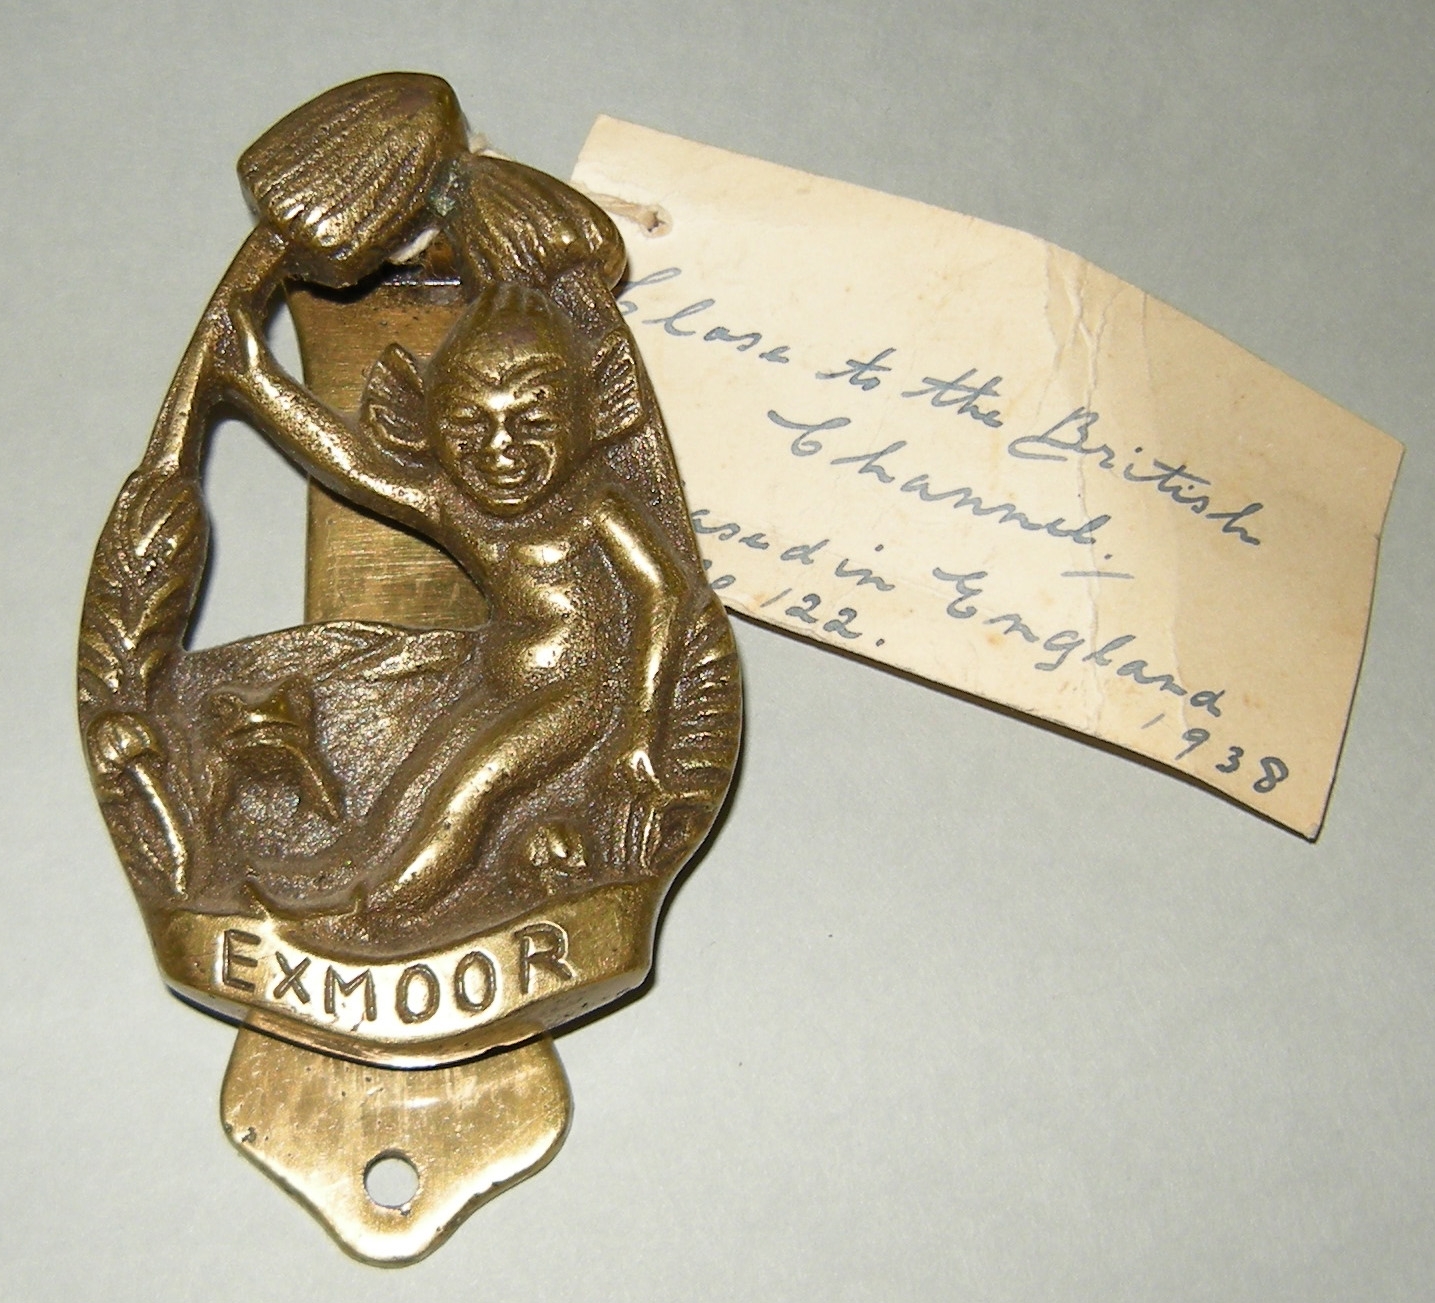 Knocker collected in England in 1938